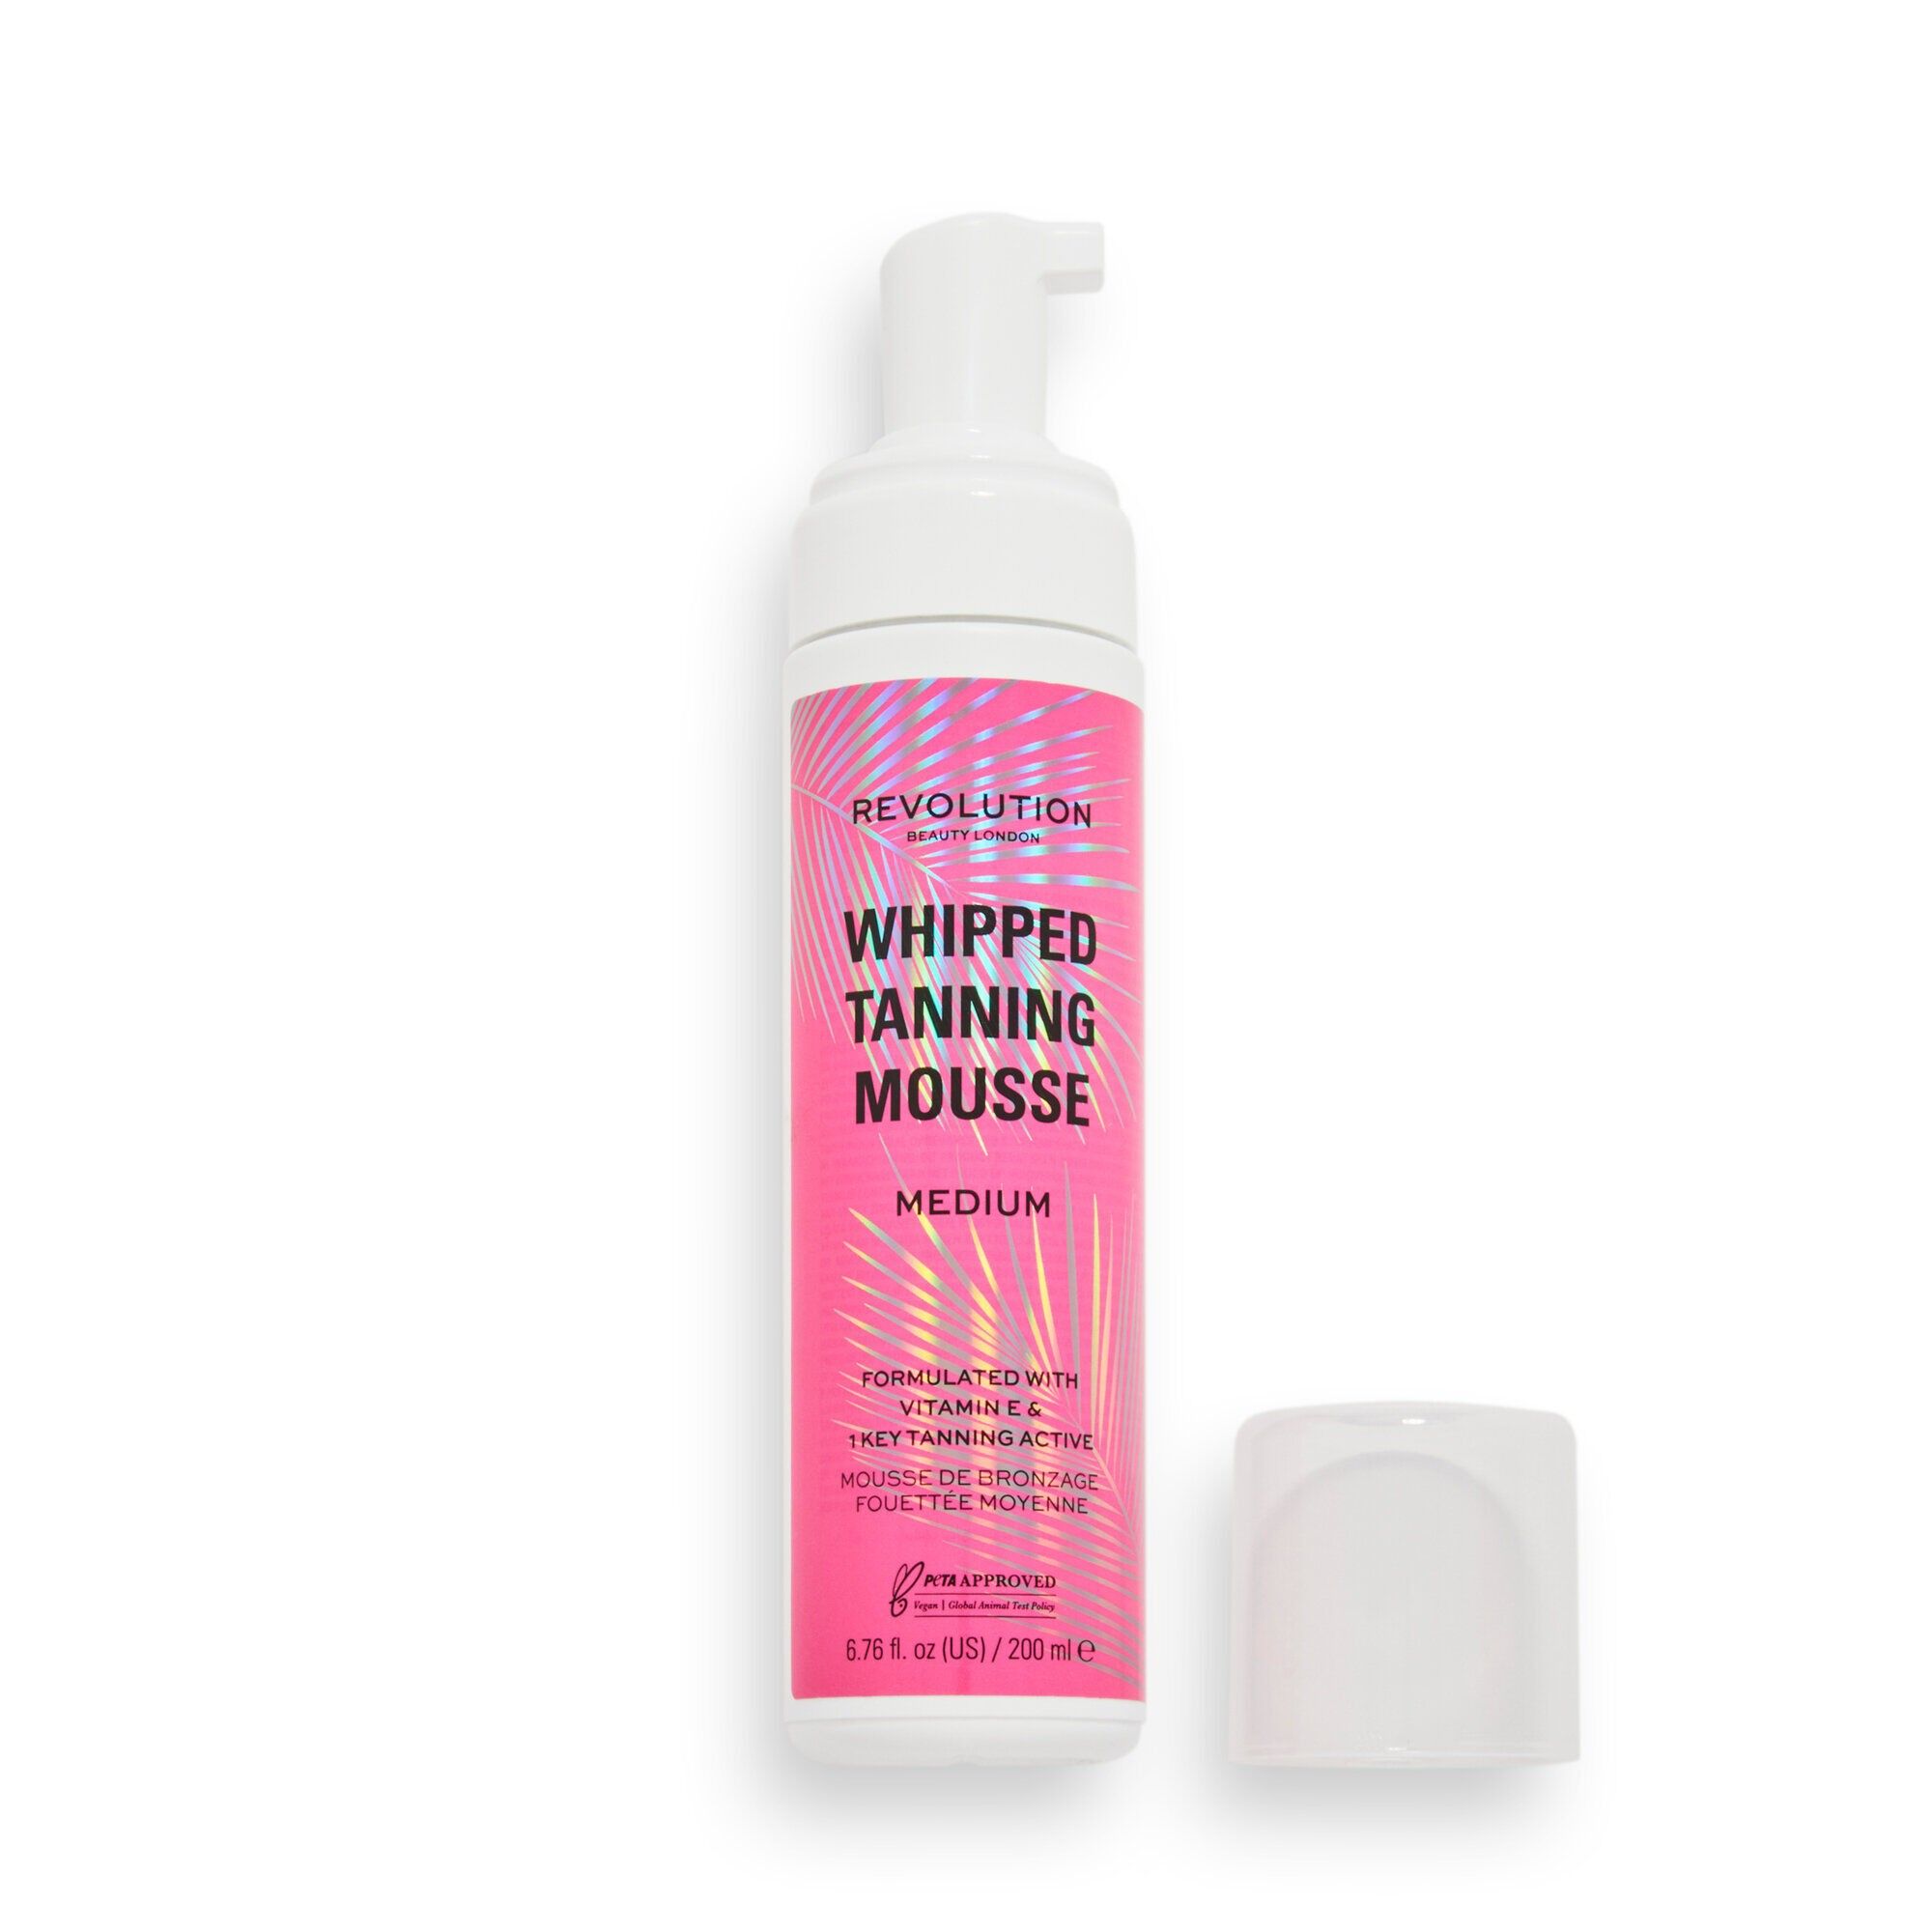 Whipped Tanning Mousse 